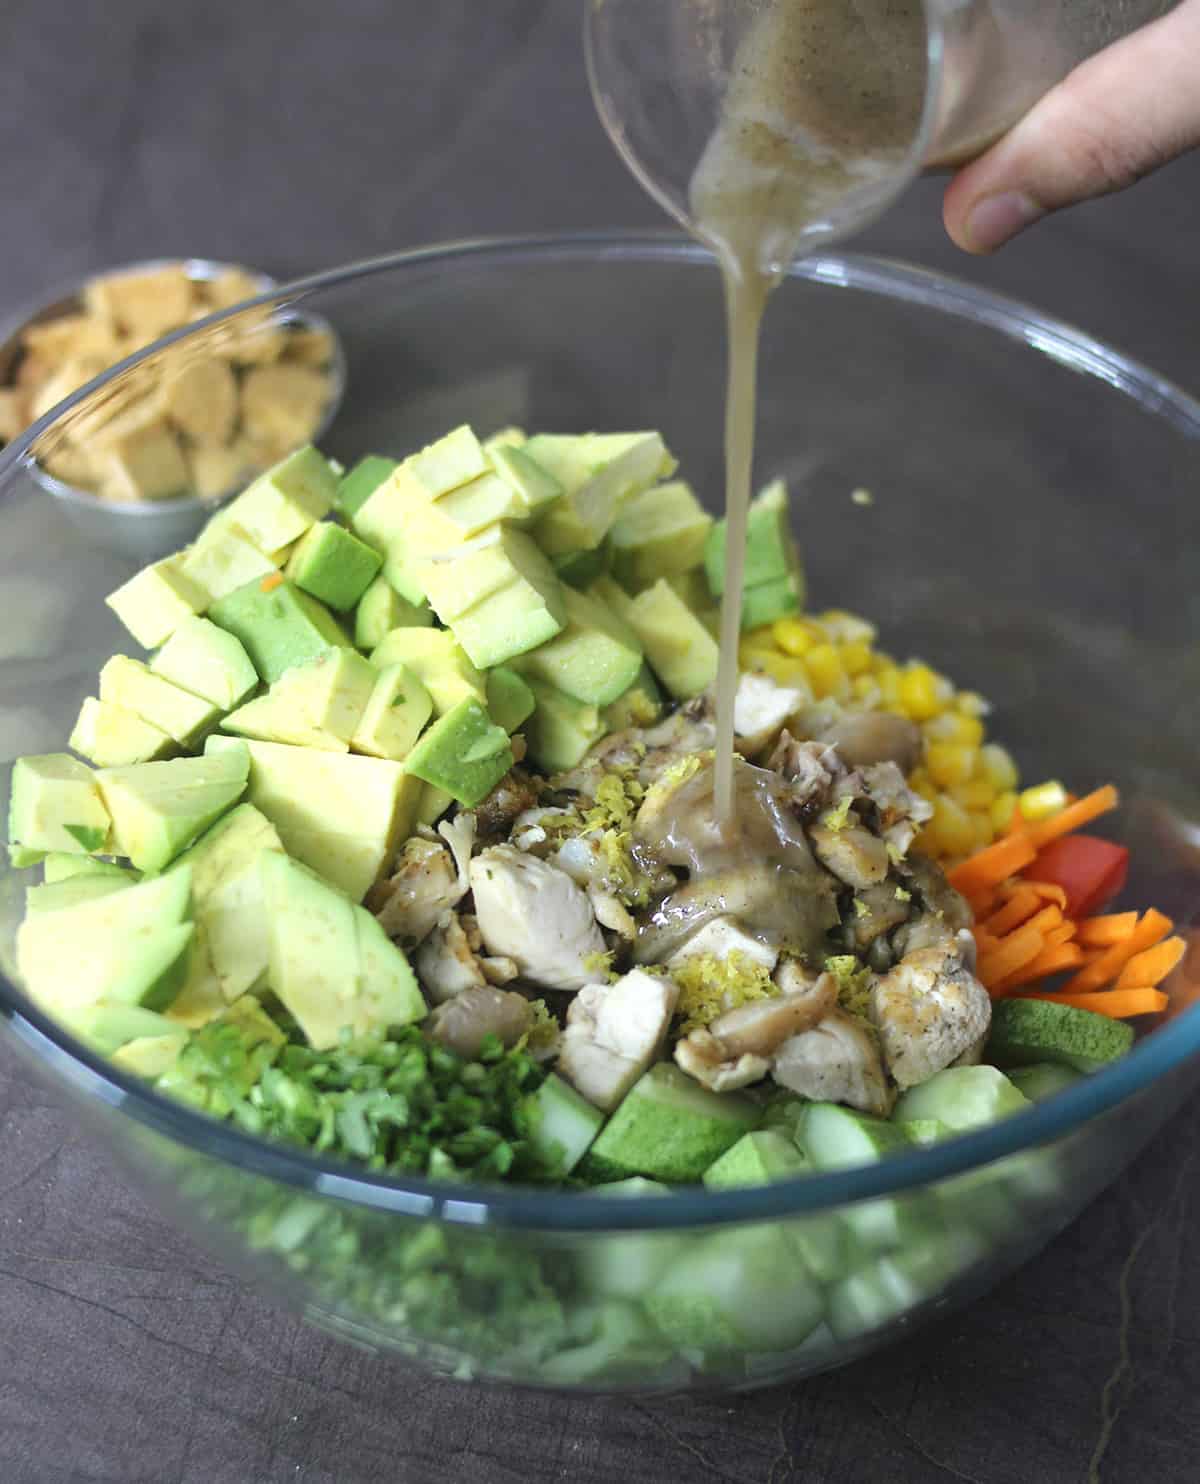 Combine all the salad ingredients and add lemon dressing. 